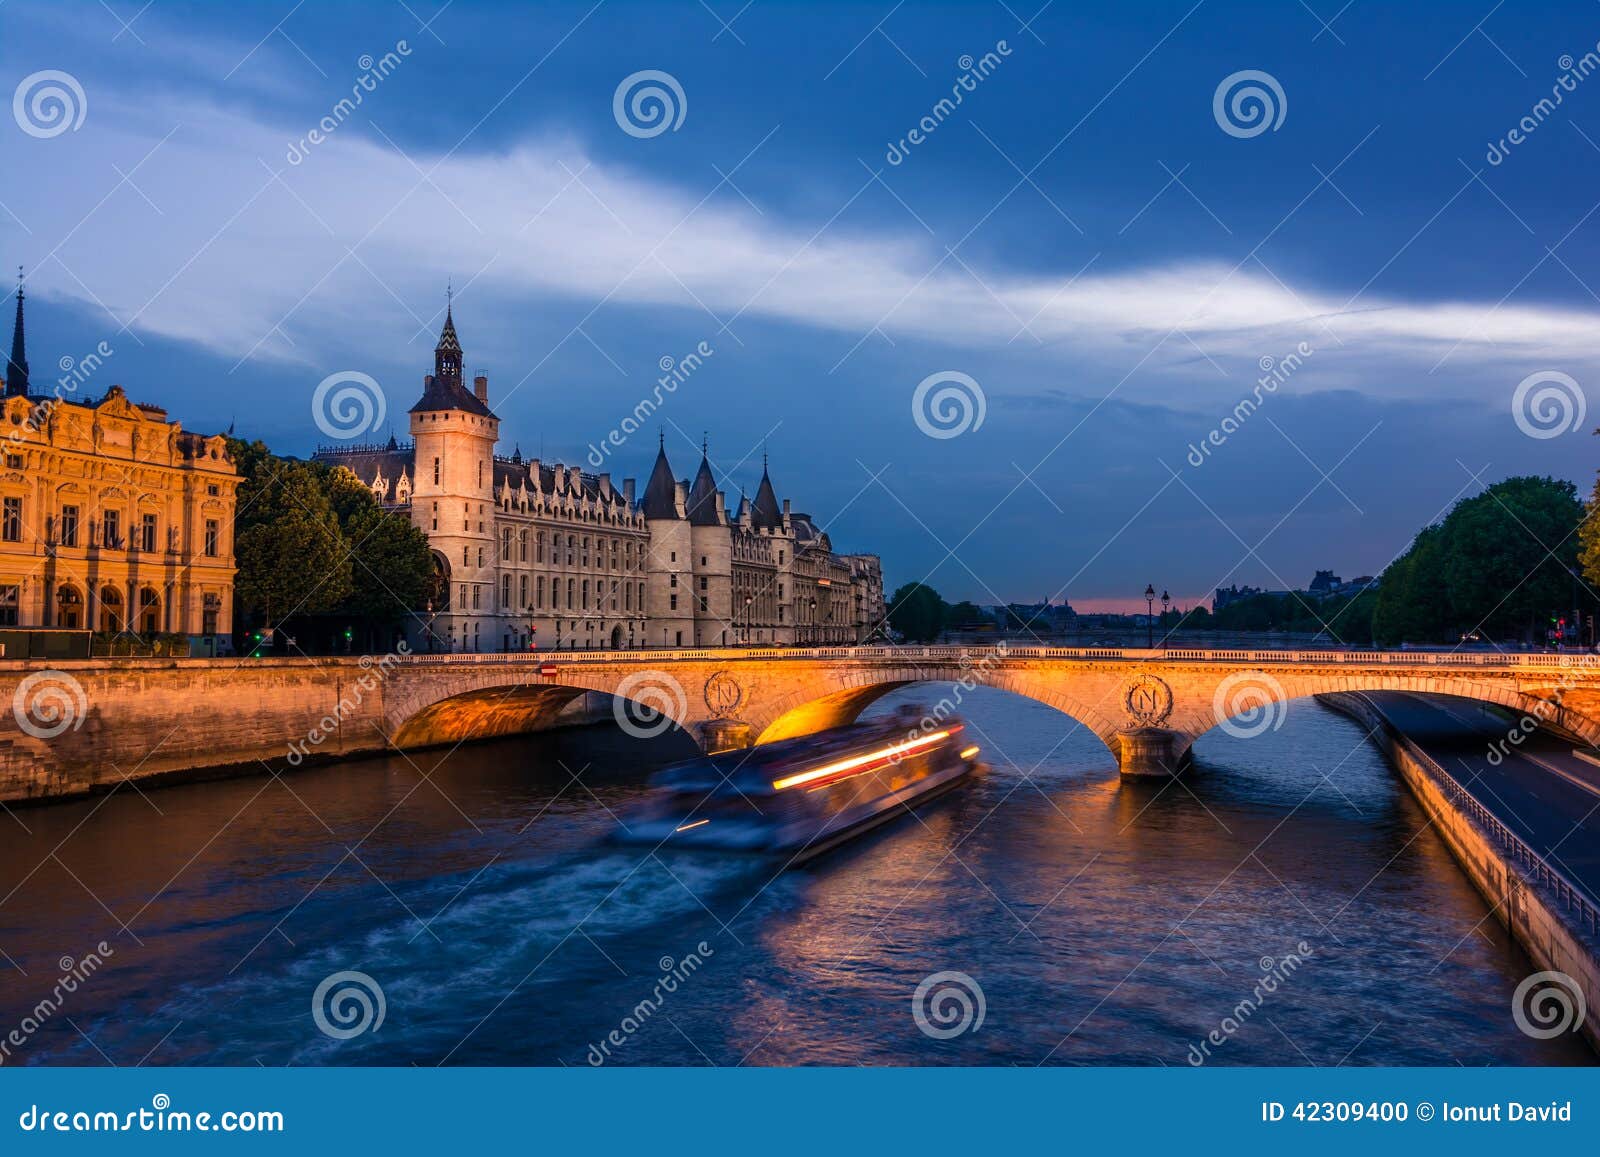 Palais de Justice, night view over the Seine. The Palais de Justice in the ÃŽle de la CitÃ© in central Paris, France. Among the oldest surviving buildings of the former royal palace are the Sainte Chapelle and the Conciergerie, a former prison.